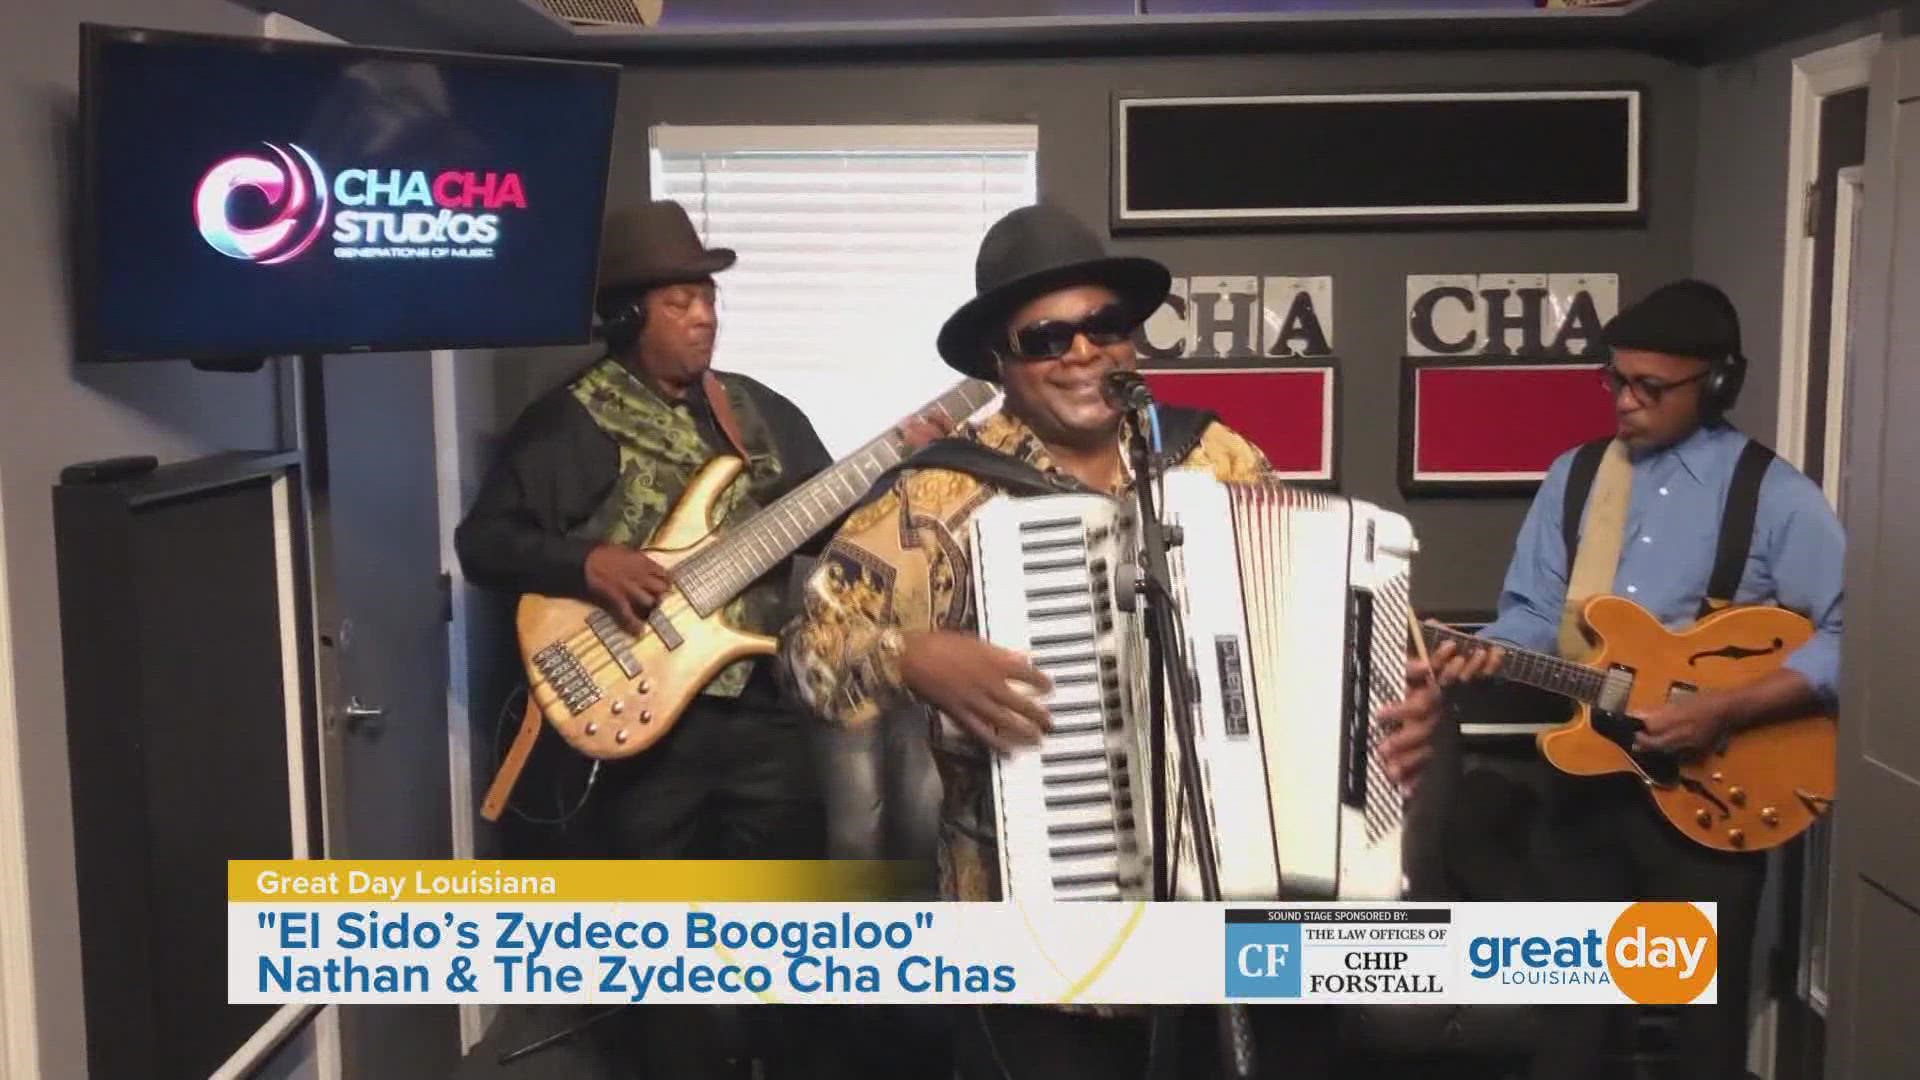 Grammy nominated Nathan & the Zydeco Cha Chas share some music with us.